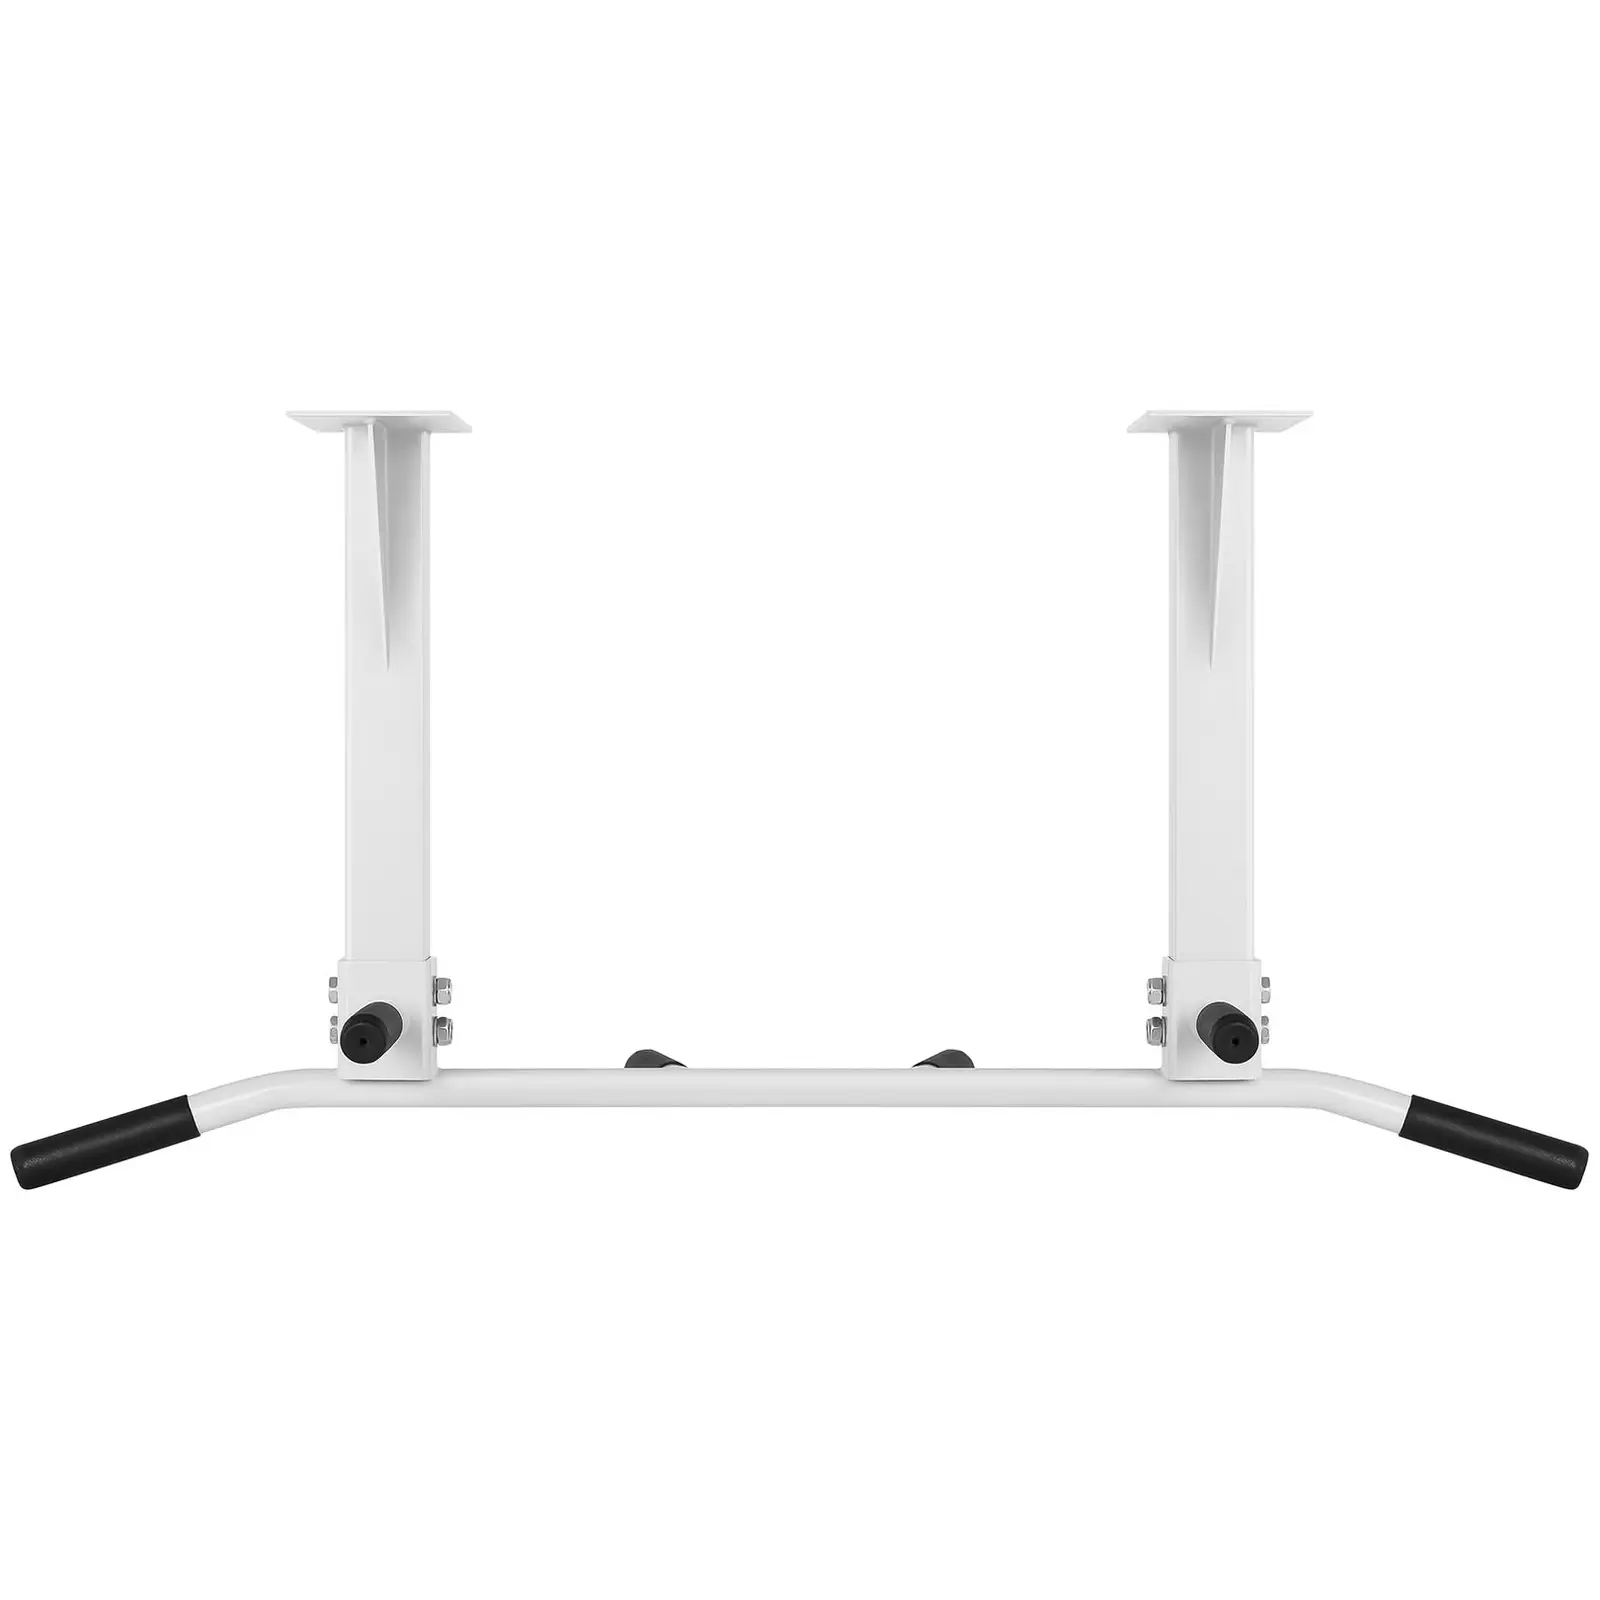 Ceiling-Mounted Pull-Up Bar - white